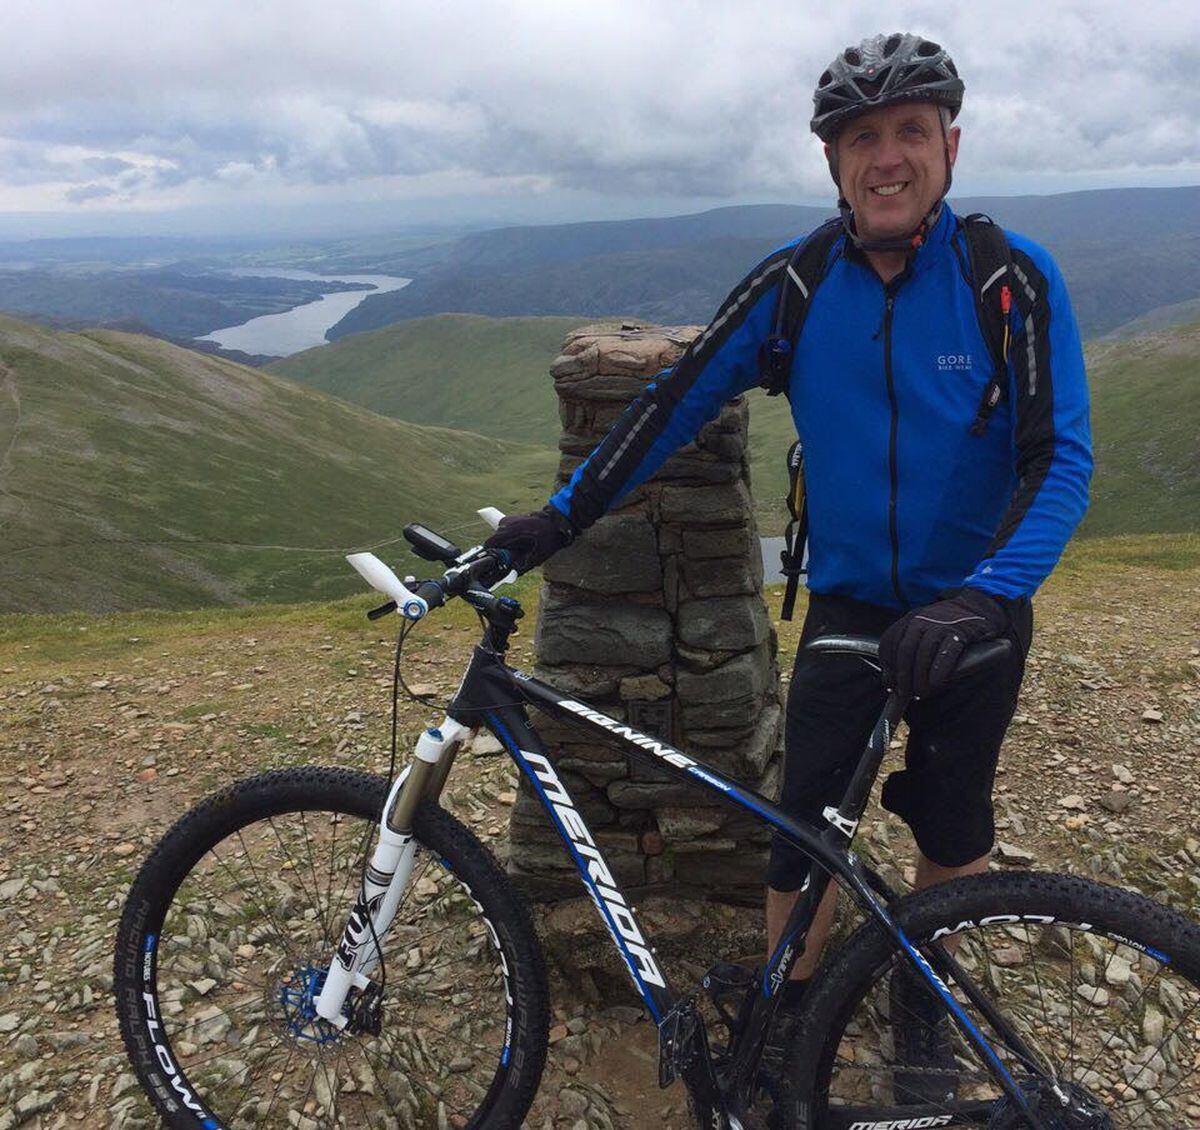 Chris Evans at the top of Helvellyn in the Lake District.